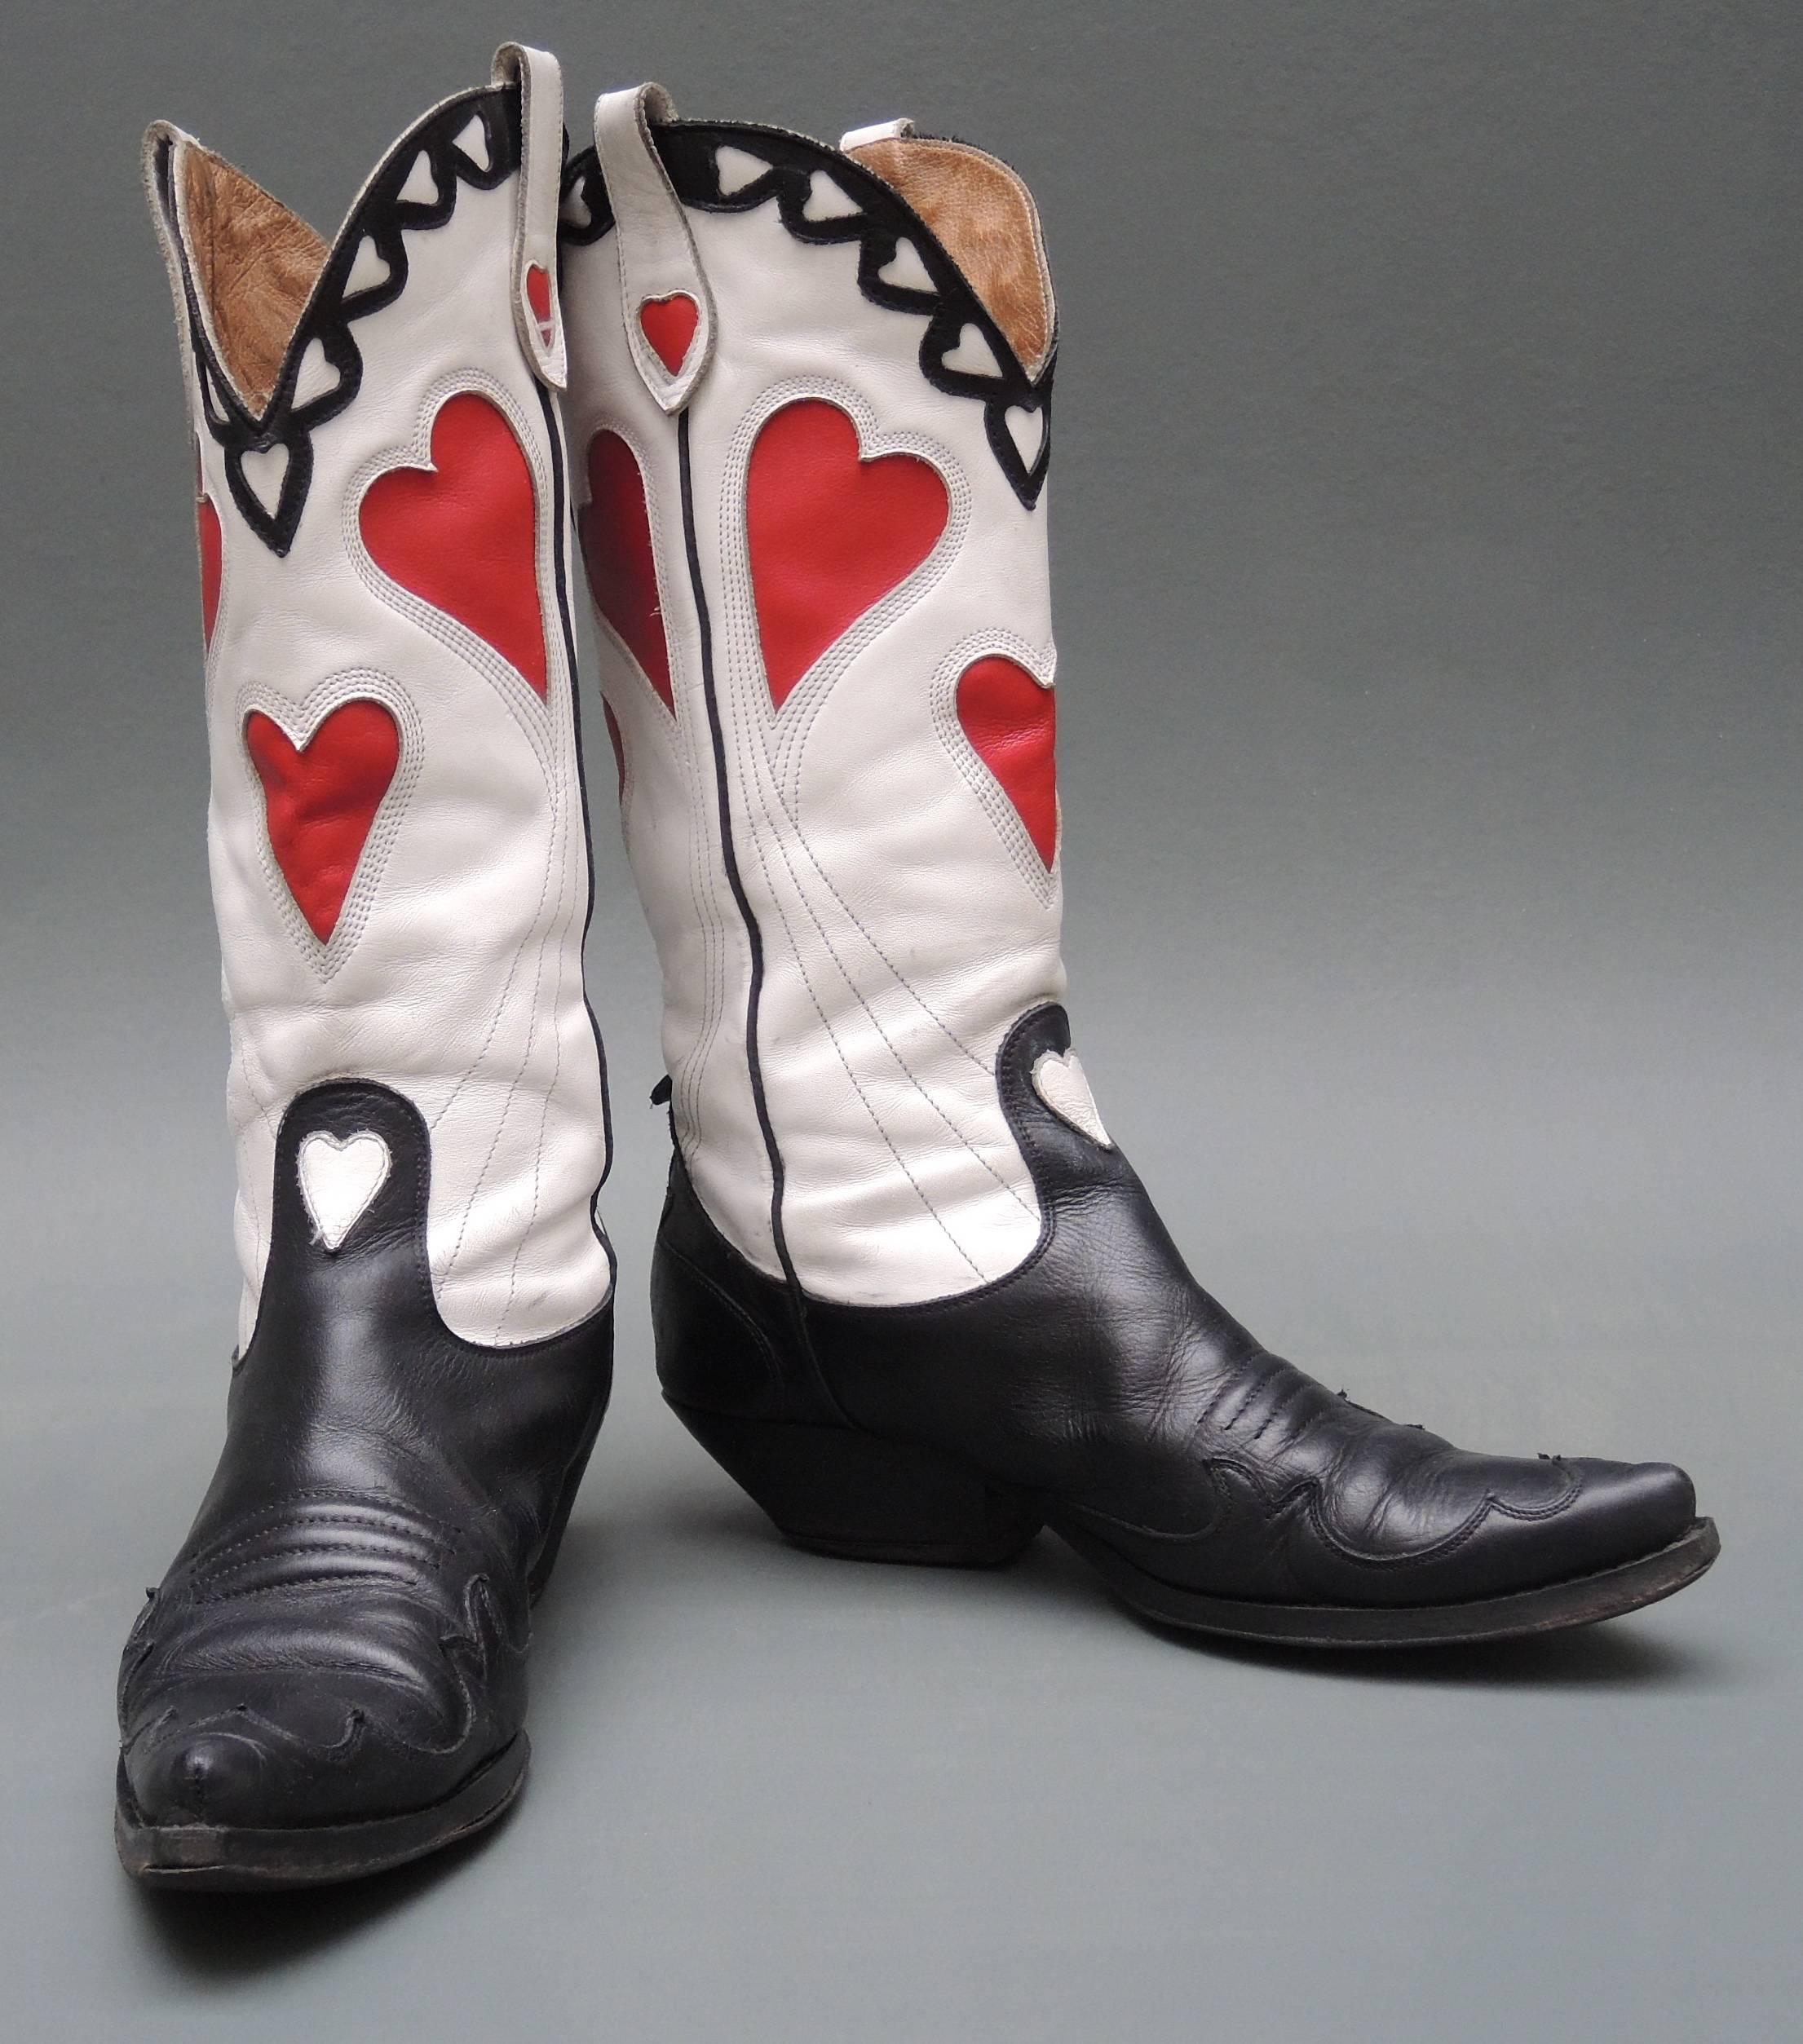 A very cool pair of vintage leather cowboy boots stitched and inset with red and white hearts. Wear to kick up your heels, or display them as decorative objects.
Fully made of soft leather with leather lining.
Ladies size 9 (39). The perfect gift